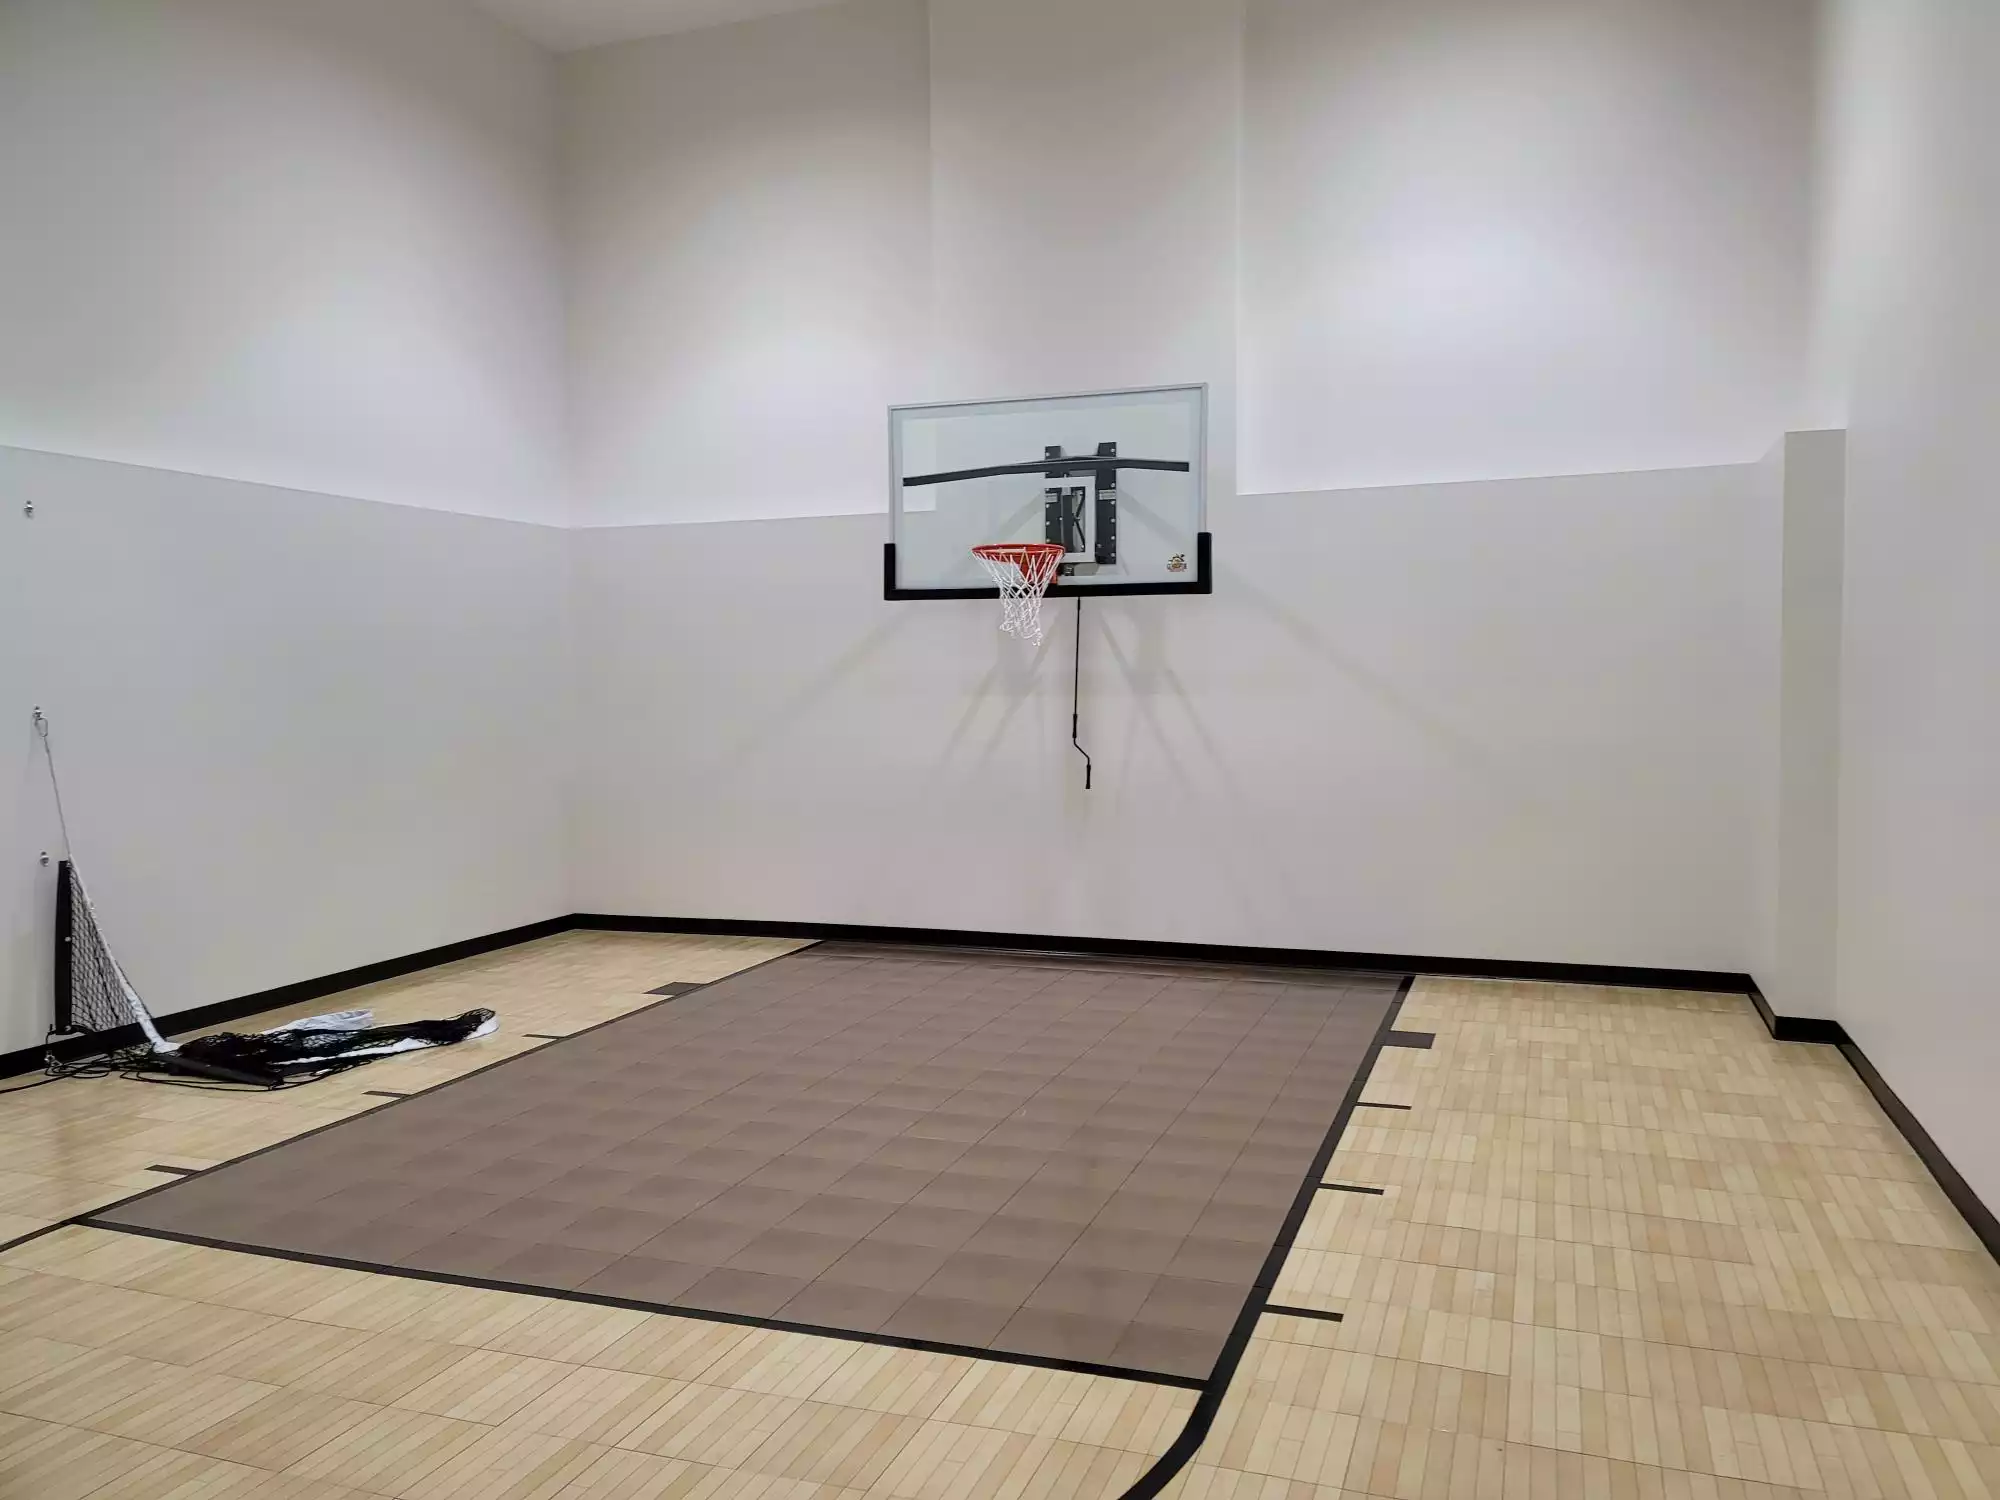 Sport play room with basket ball court & hoop plus net for volleyball and pickle ball